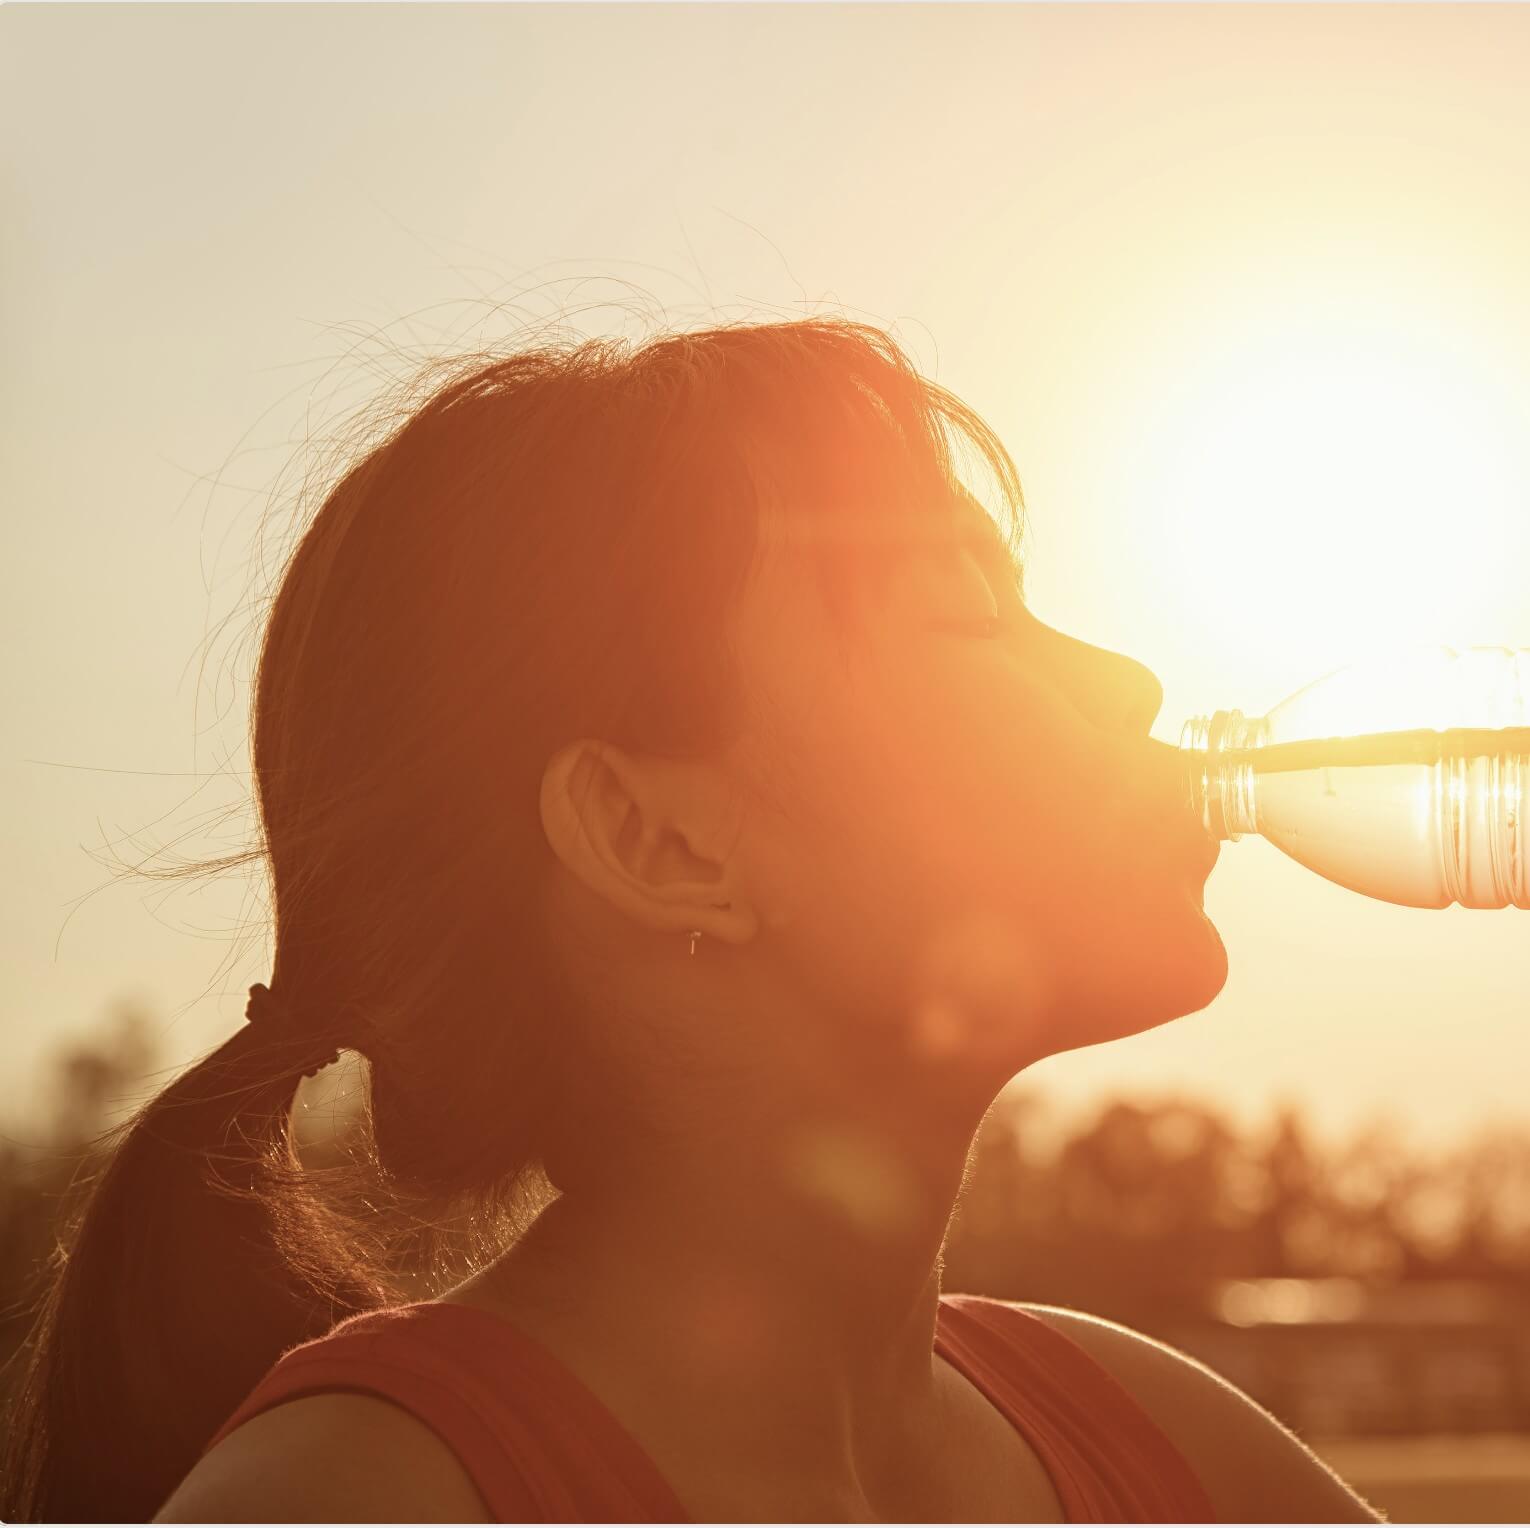 Keep your cool this summer: How to Prevent Heatstroke